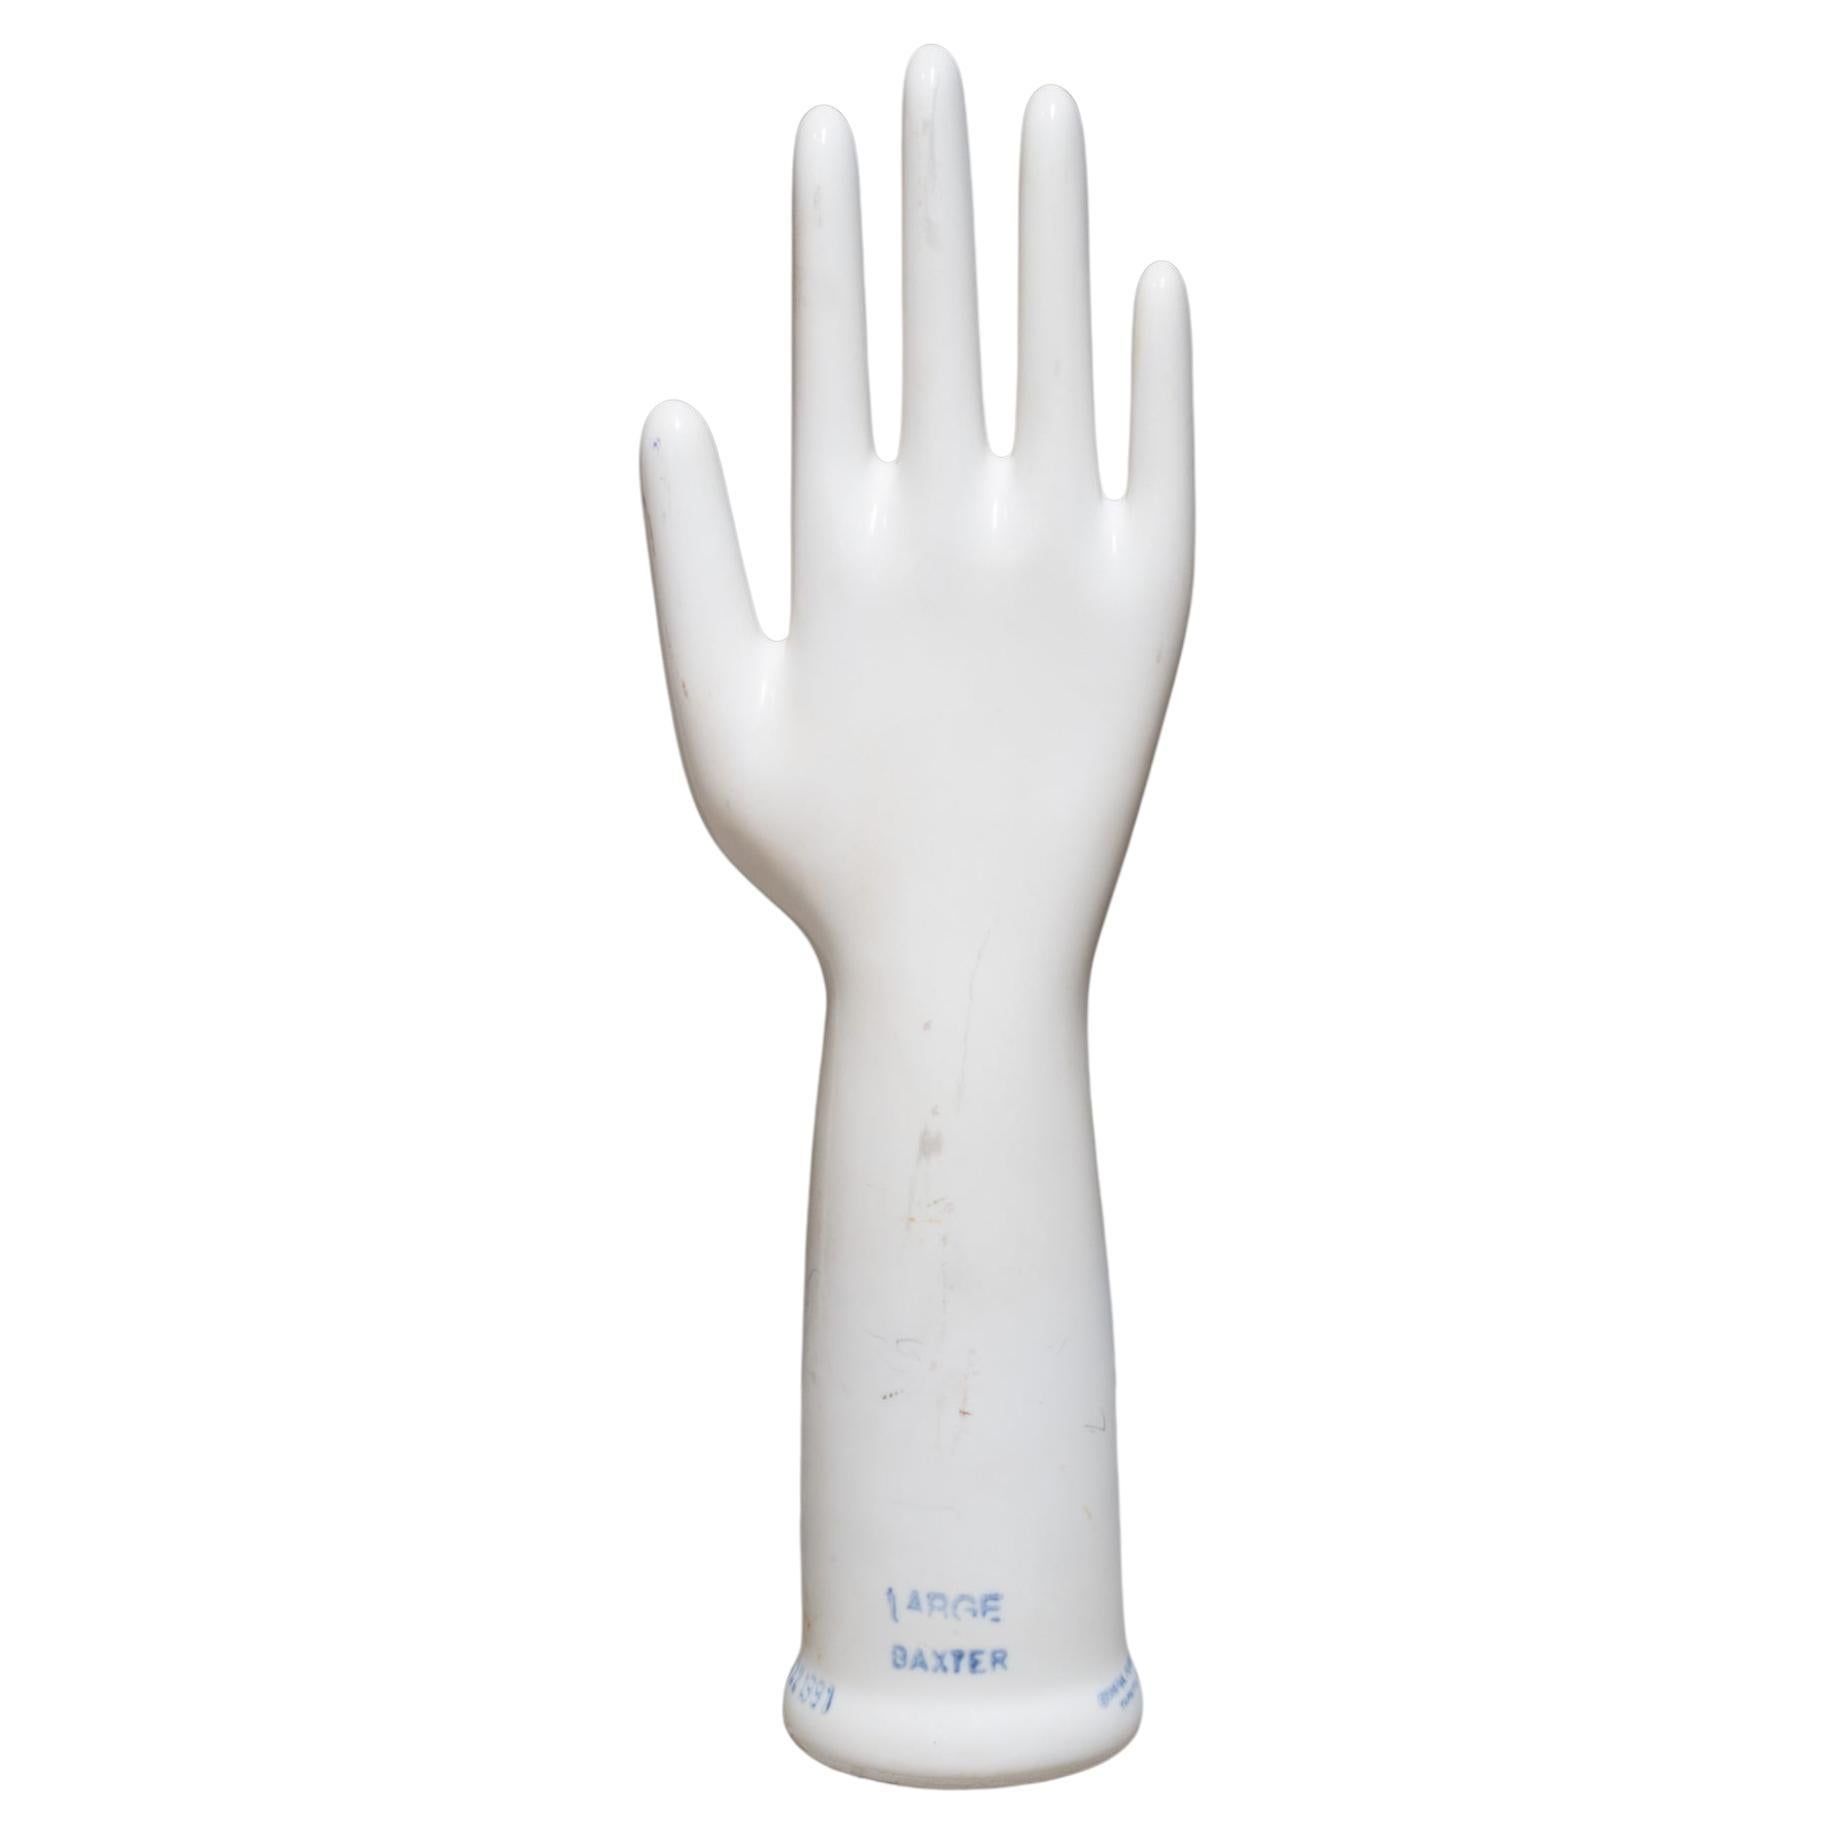 Large Glazed Porcelain Factory Rubber Glove Mold, C.1991  (FREE SHIPPING) For Sale